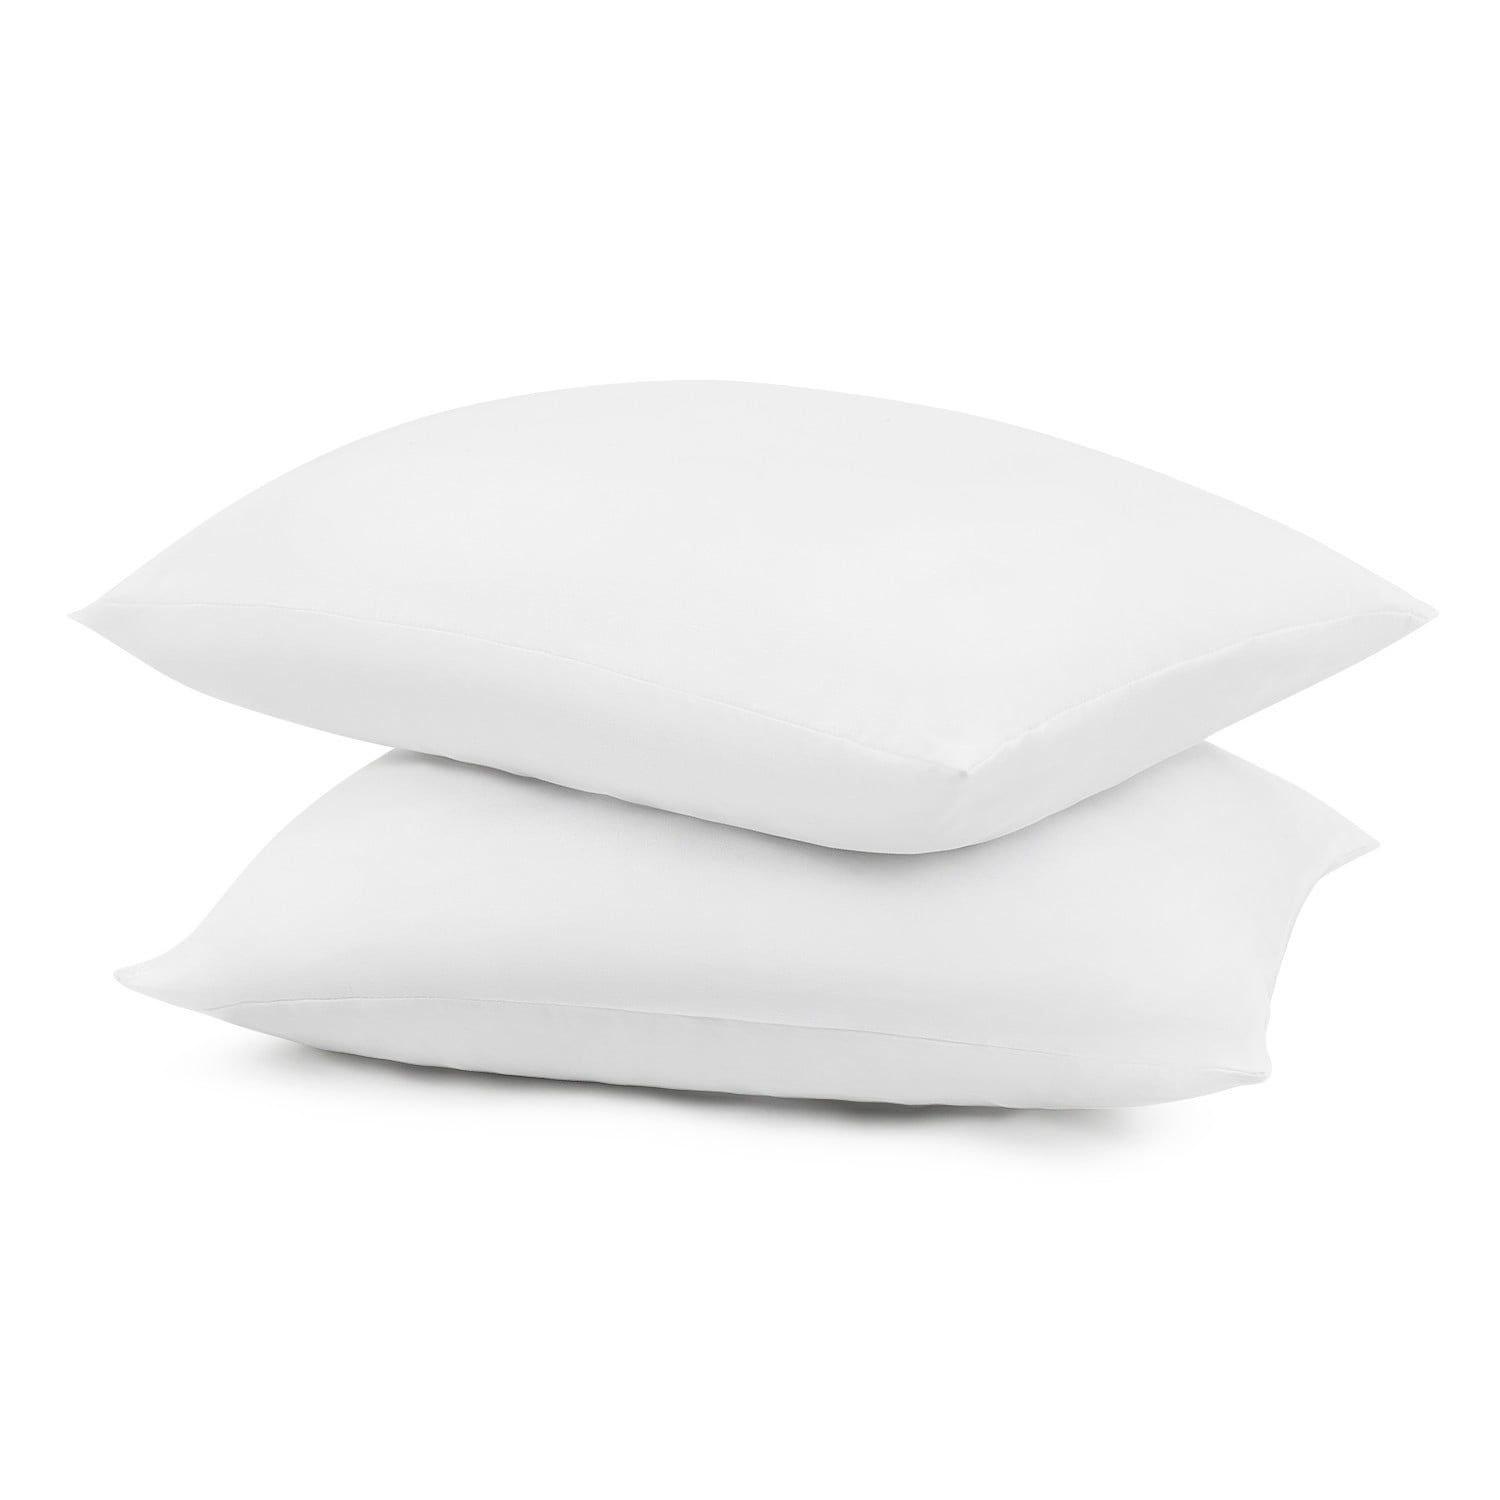 Qeils 18 x 18 Pillow Inserts Set of 2 White Throw Pillow Inserts with Soft Polyester Cover - Rectangle Square Interior Sofa Pillow Inserts Decorative